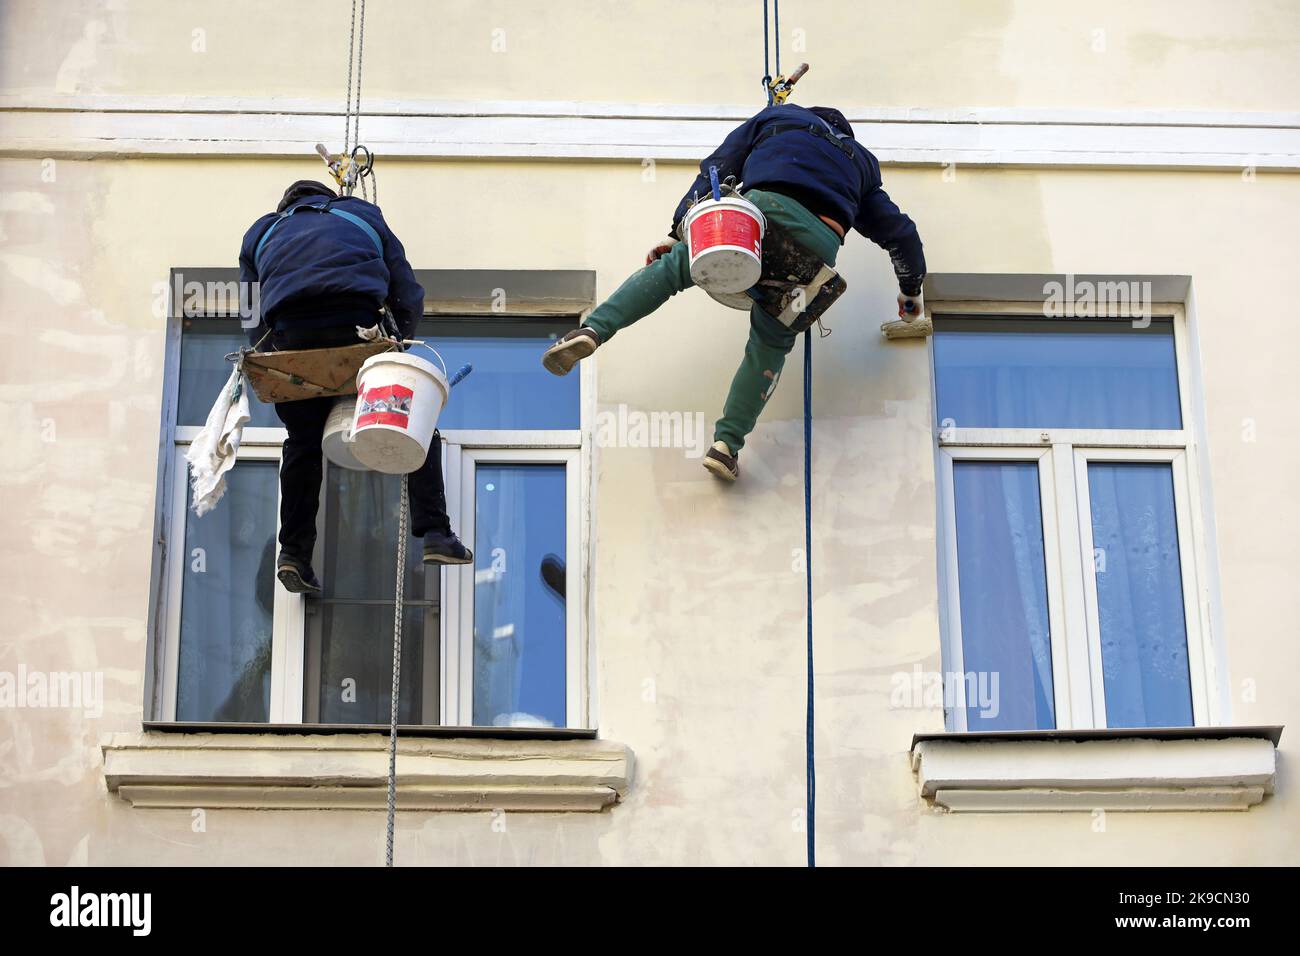 Workers paints the building wall. Painters hanging on a cables with paint buckets, steeplejack repairing house facade with roller brush Stock Photo